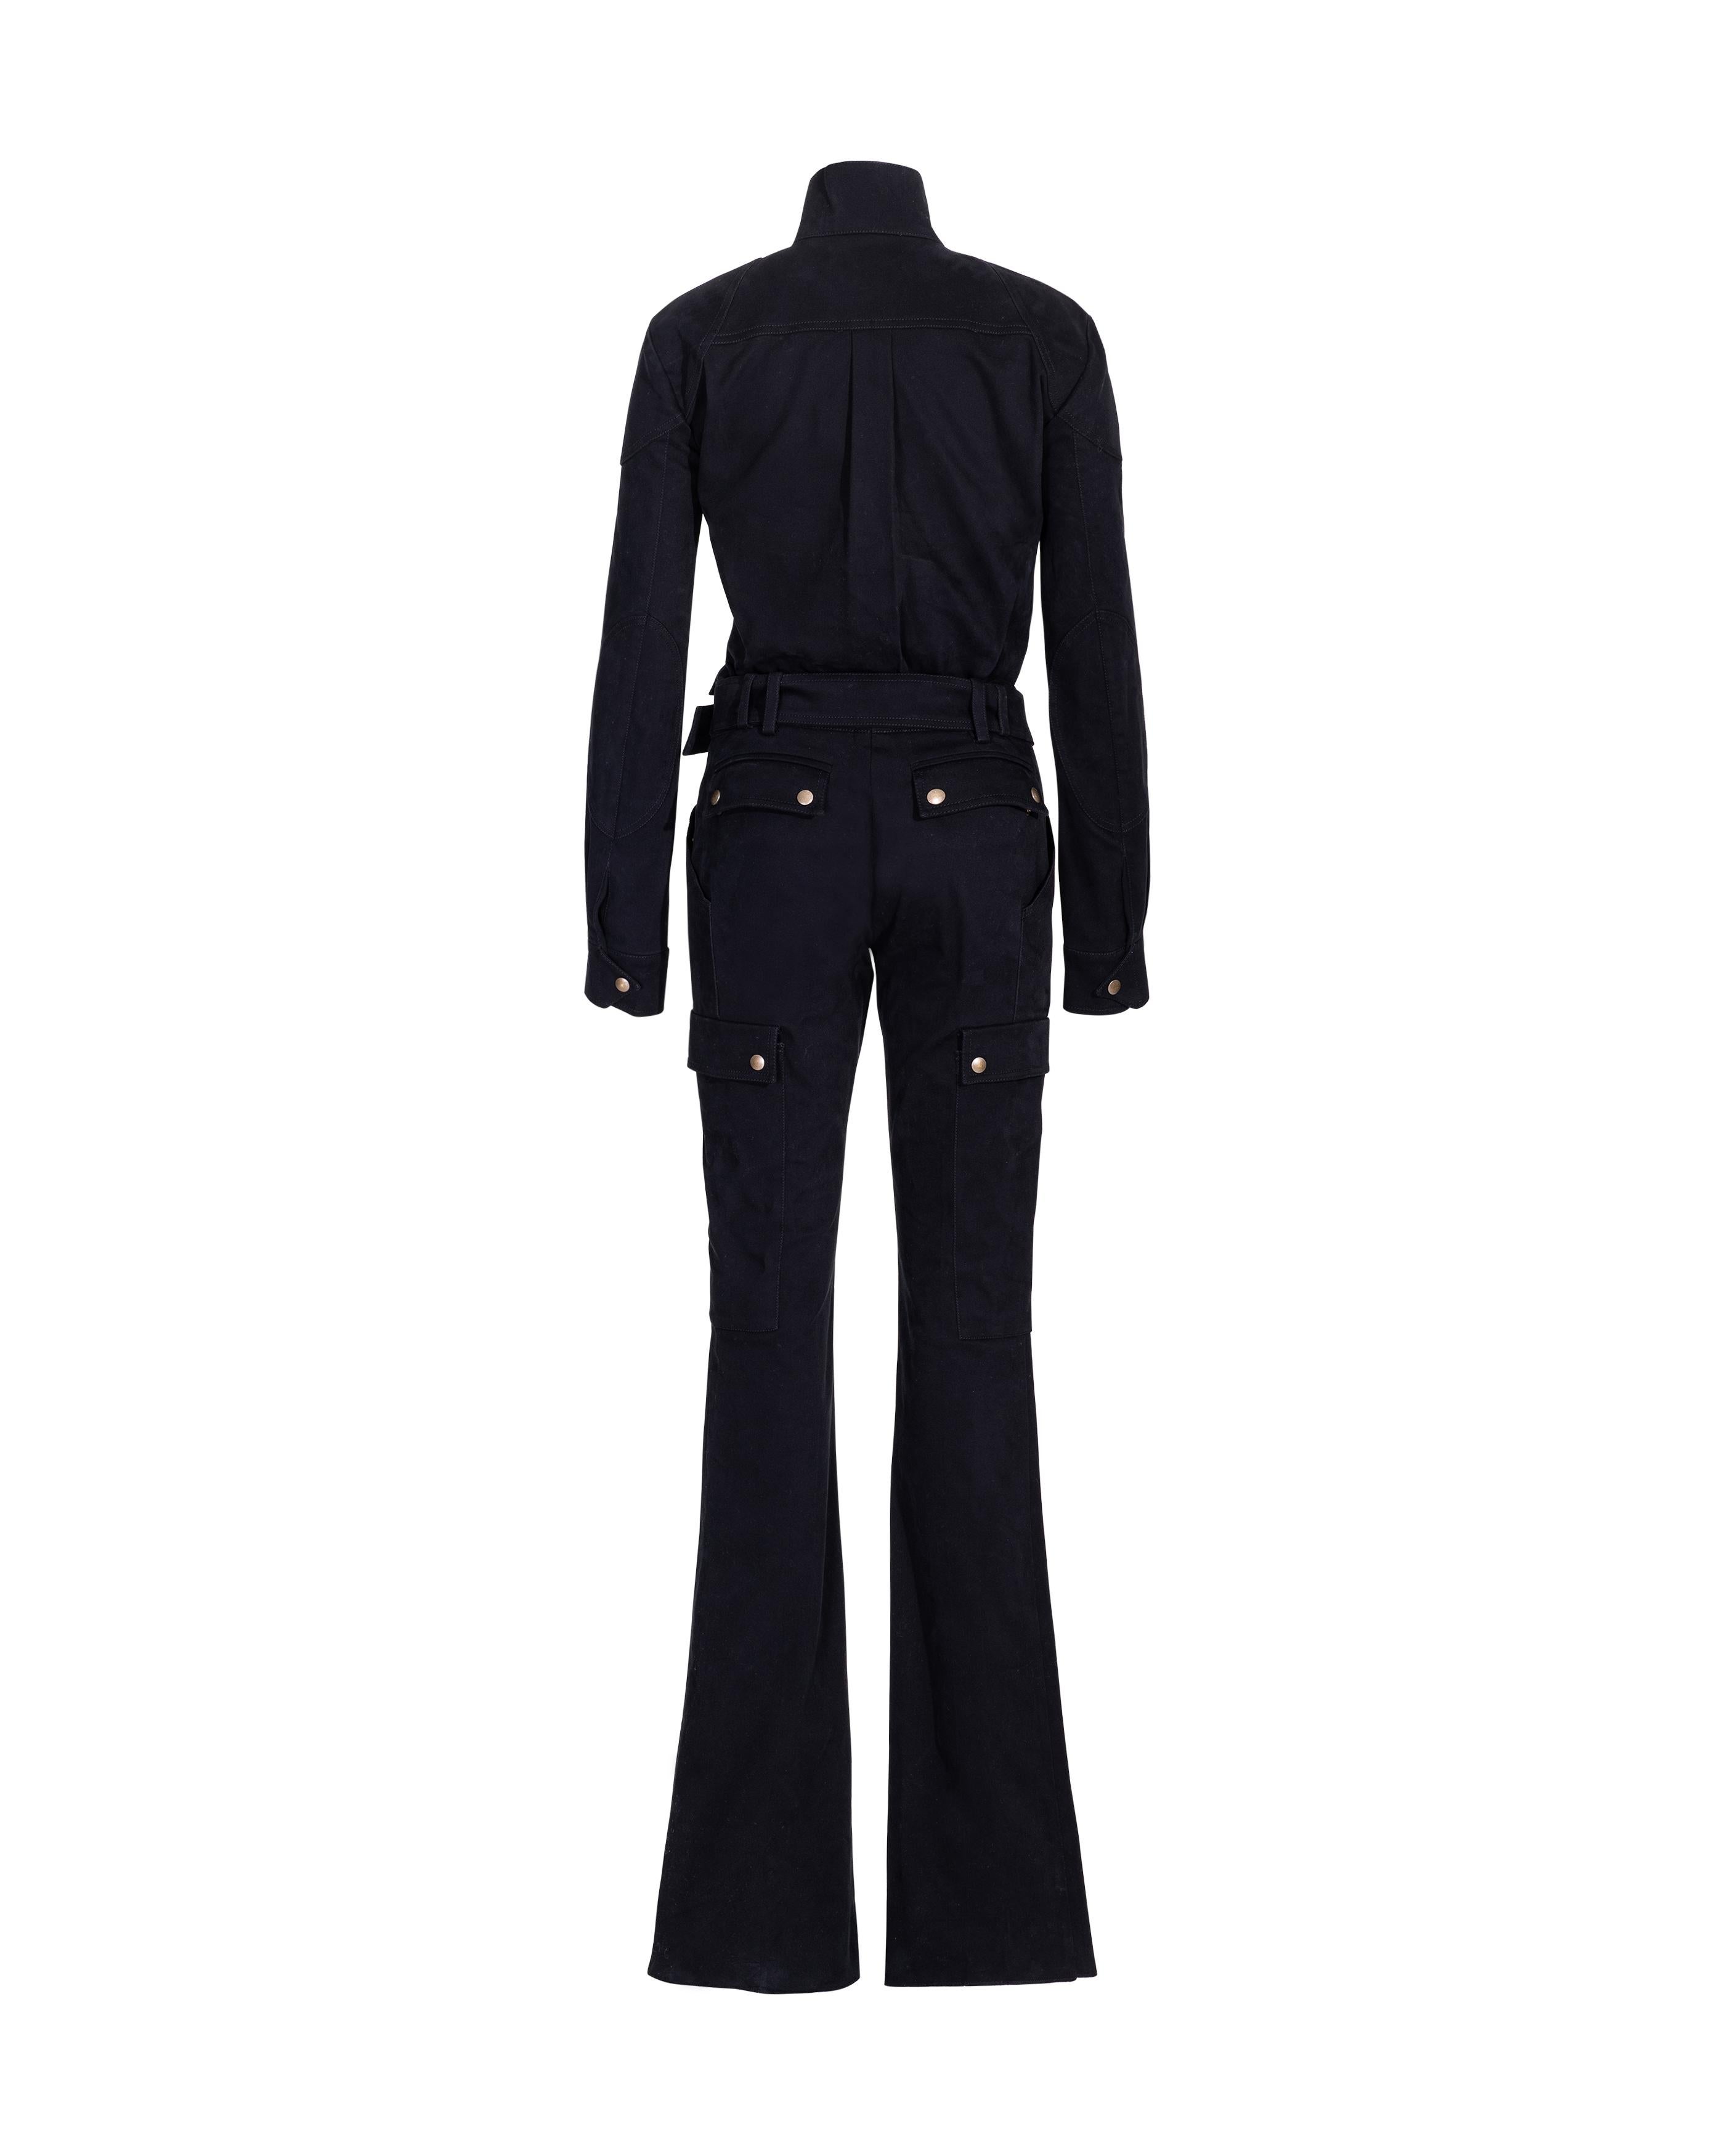 Women's A/W 2001 Balenciaga by Nicolas Ghesquiere Black Jumpsuit with Bronze Hardware For Sale